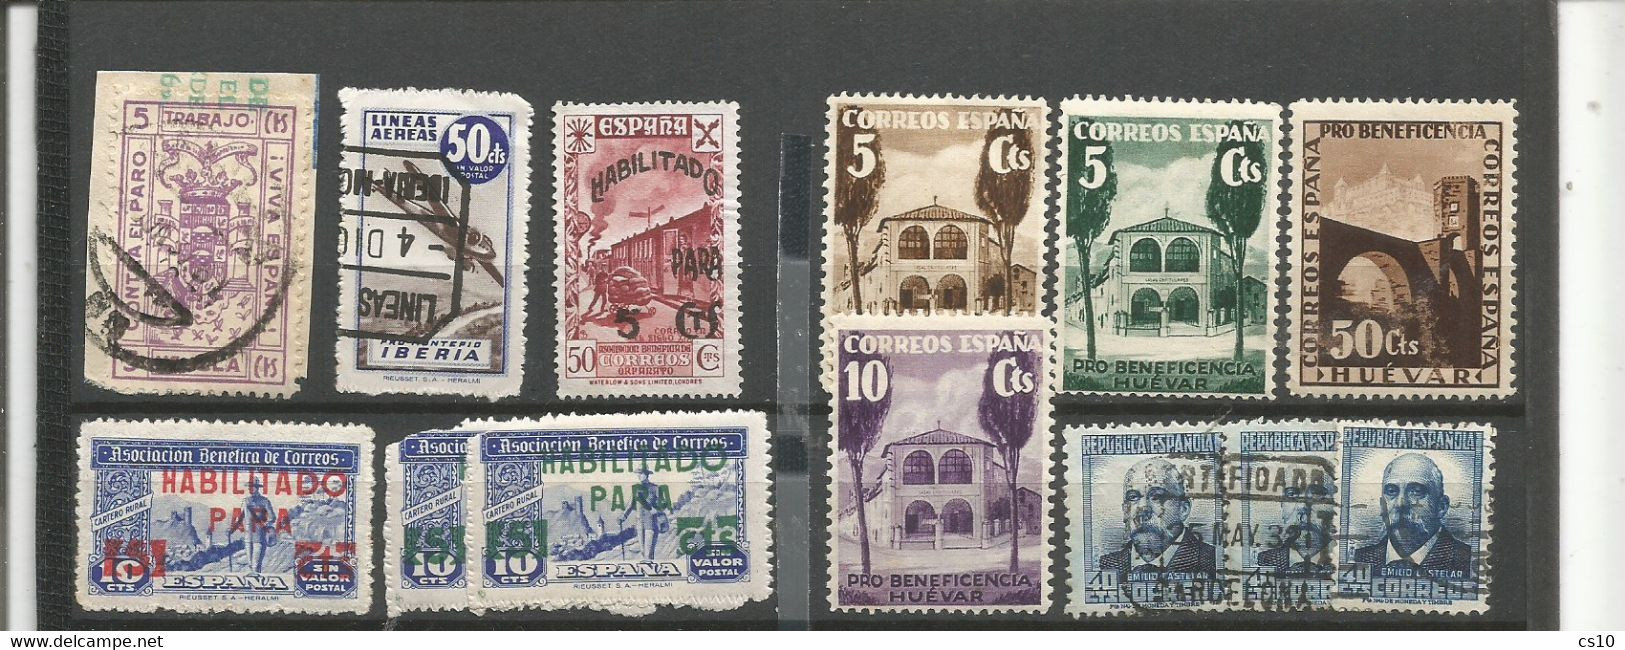 Spain 2 Scans Lot Of Older, Regular Issues HVs Local Issues Airmail OVPT Etc - Vrac (max 999 Timbres)